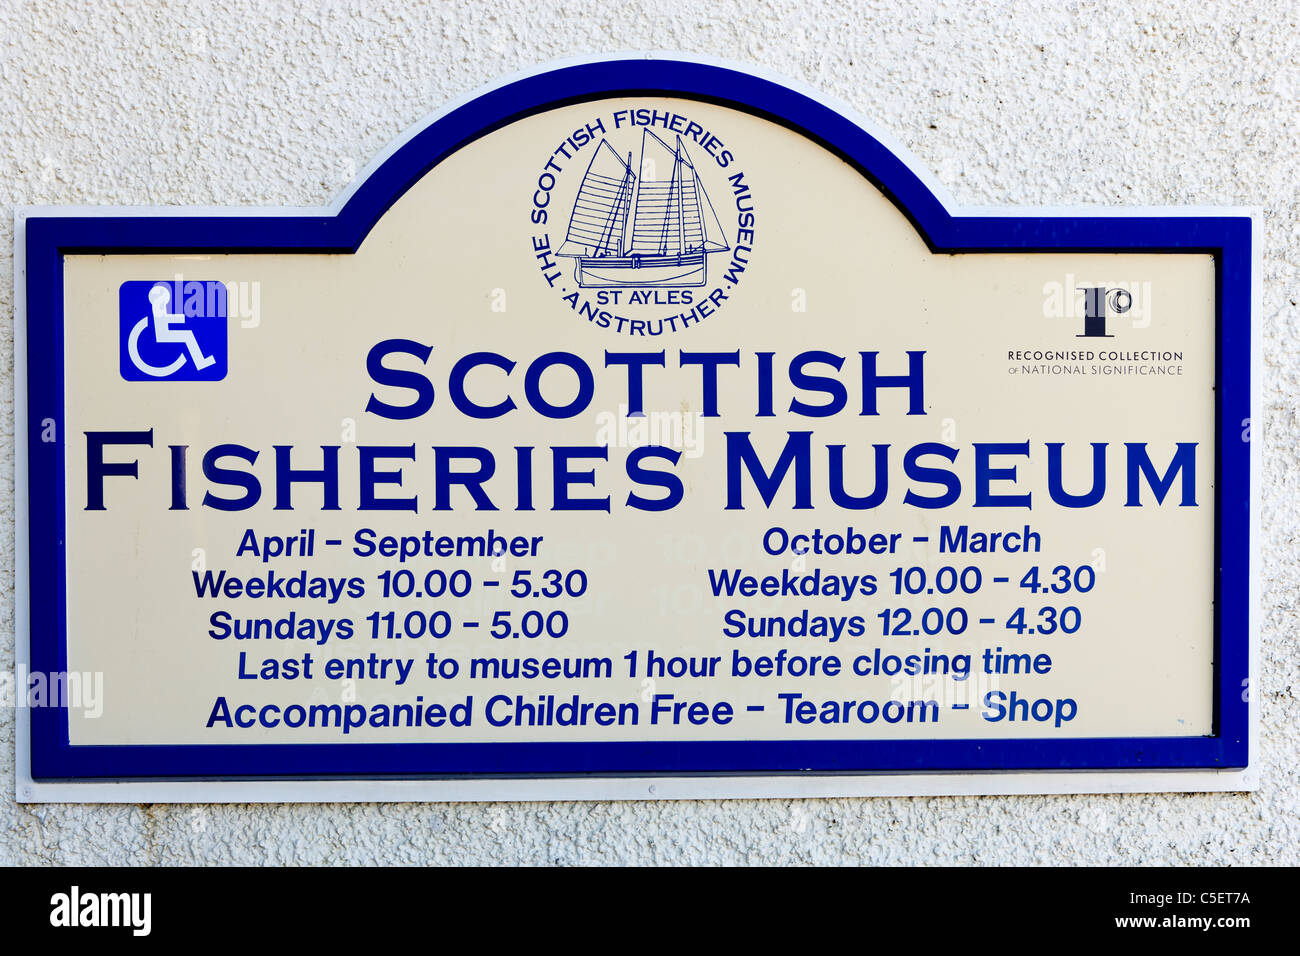 Sign for the Scottish Fisheries Museum, Anstruther, East Neuk, Fife, Scotland, UK Stock Photo